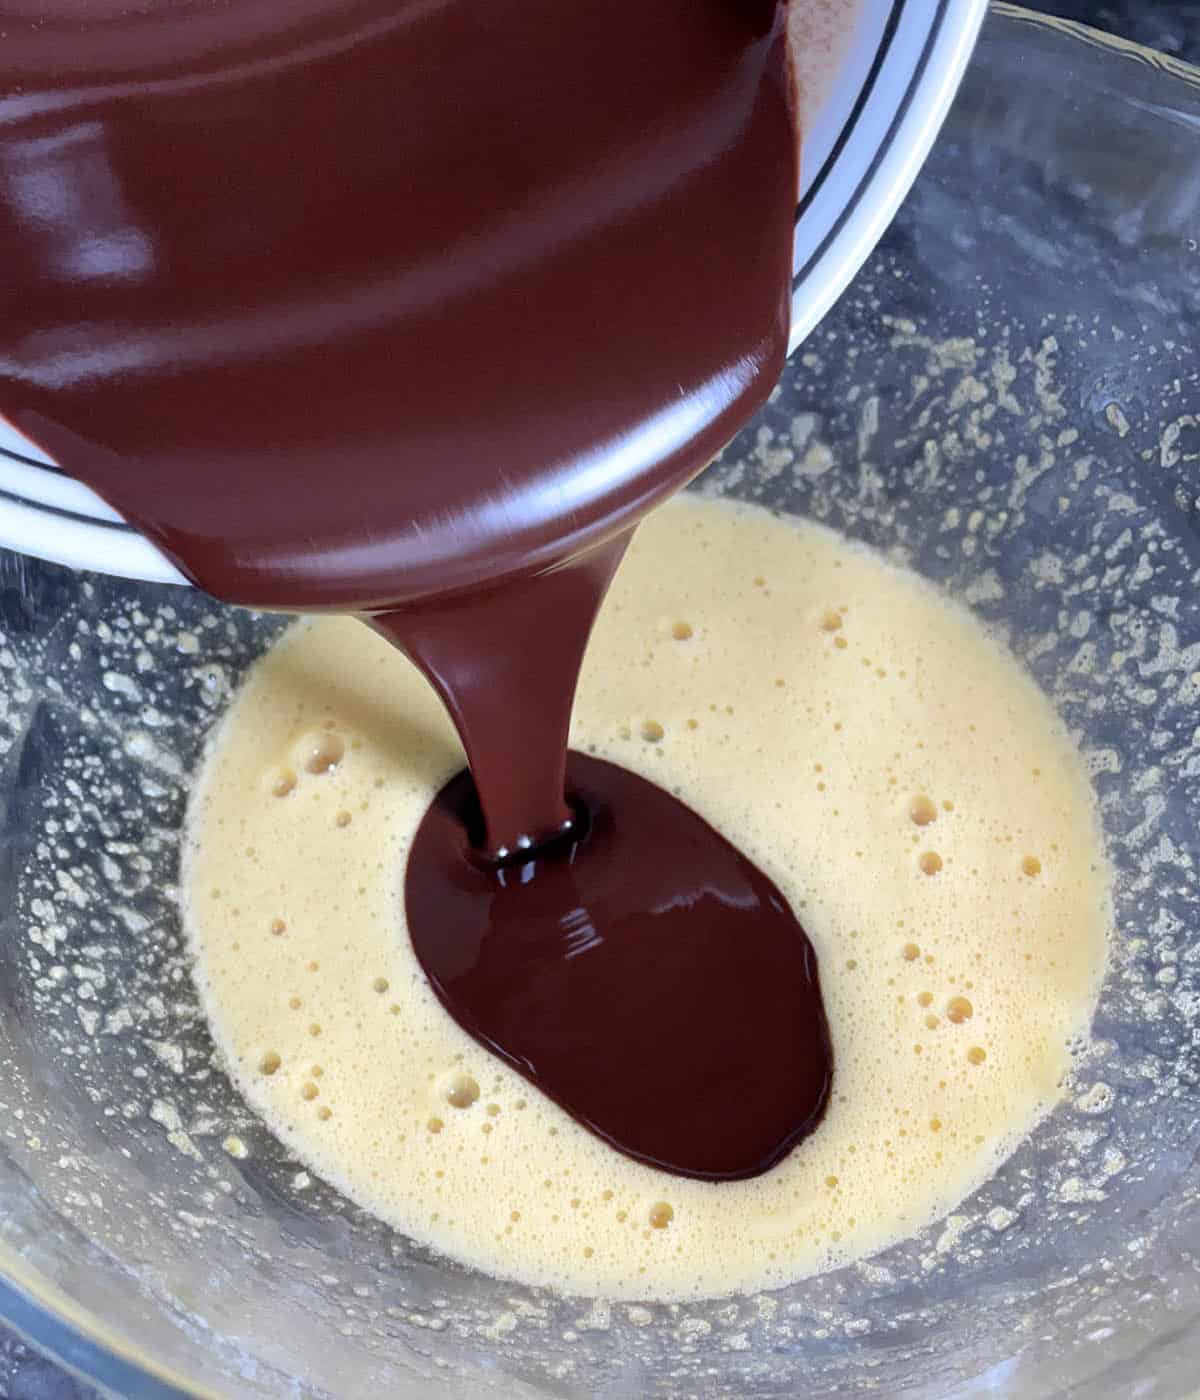 Brown melted chocolate being poured into a glass bowl containing yellow liquid.